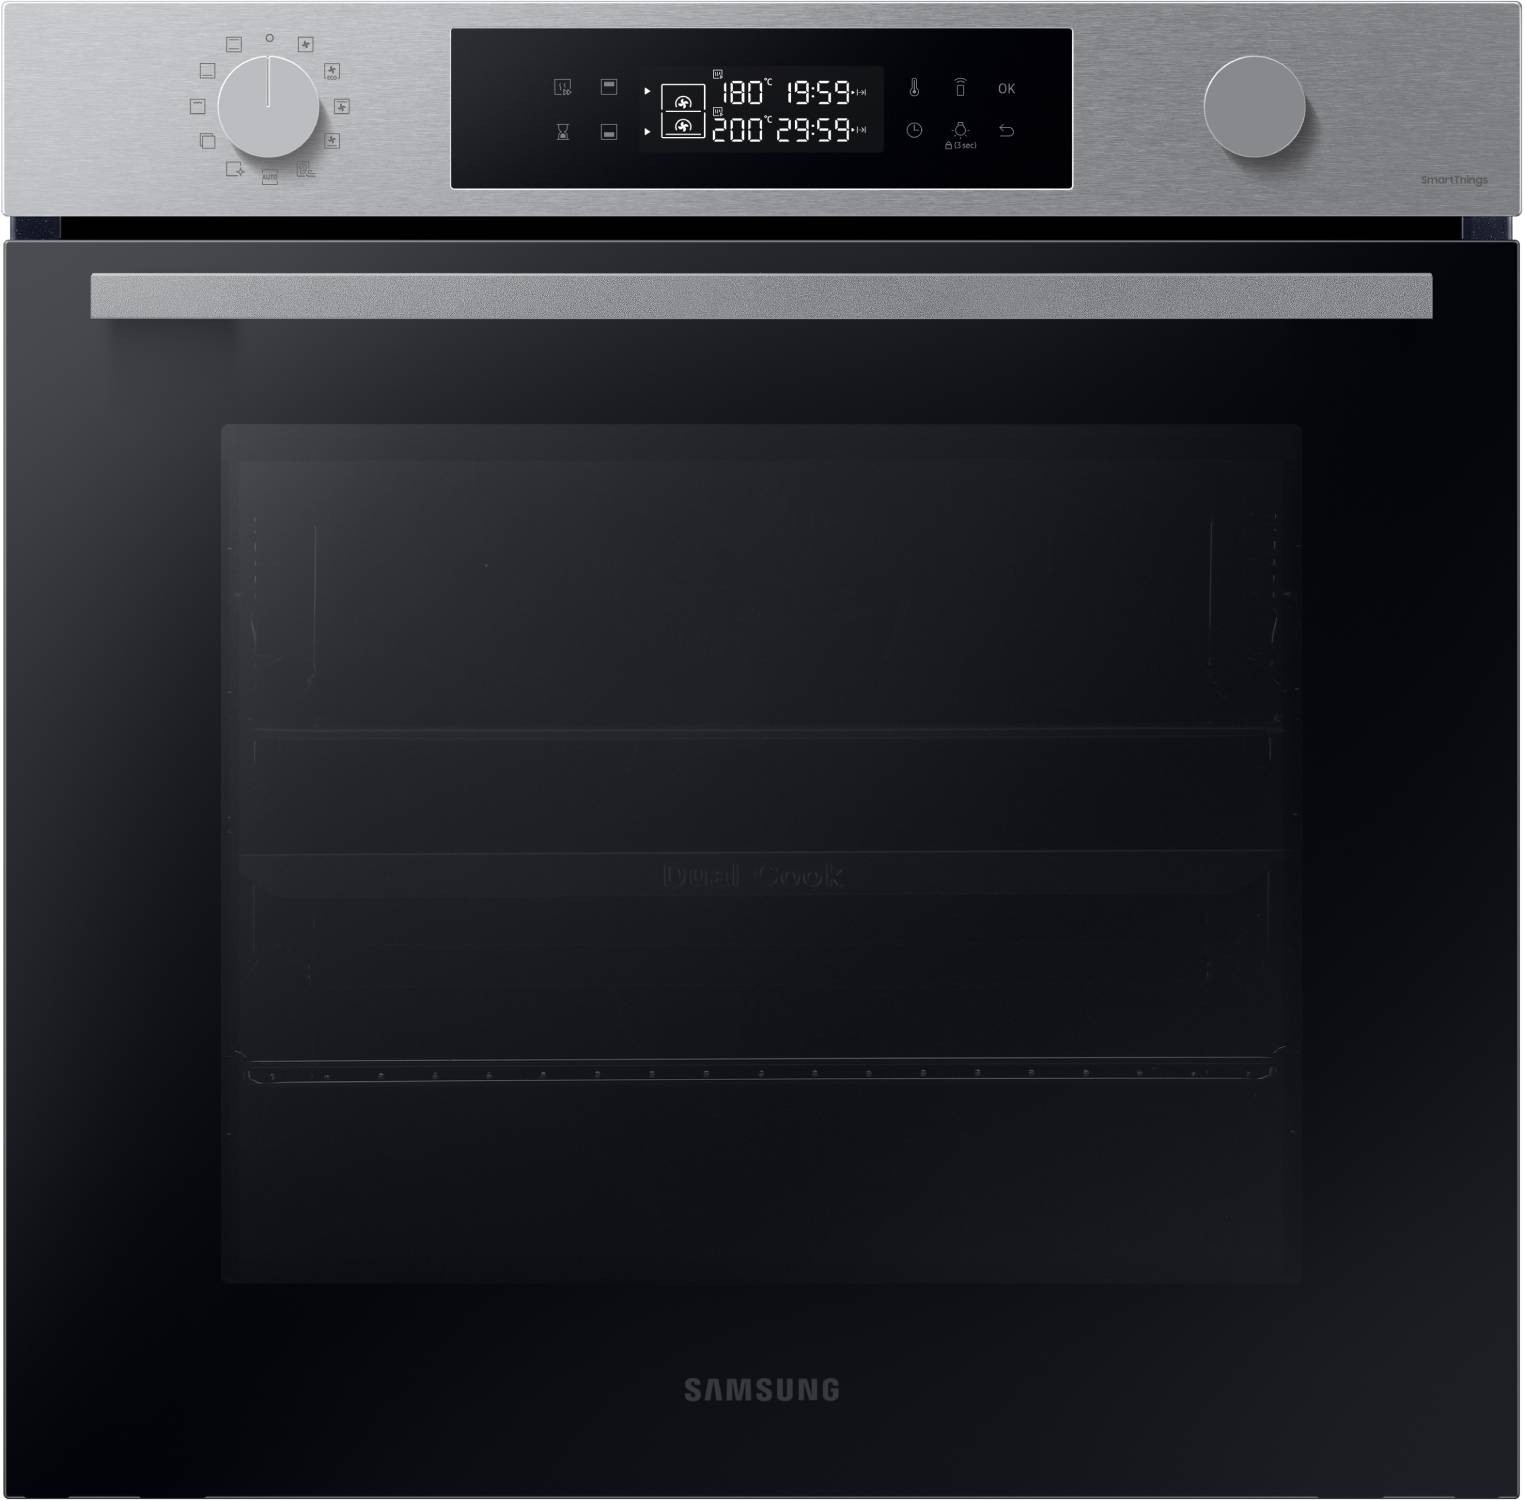 SAMSUNG Four encastrable pyrolyse Multifonction Twin Convection Wi-Fi 76L Inox  - NV7B4430ZAS